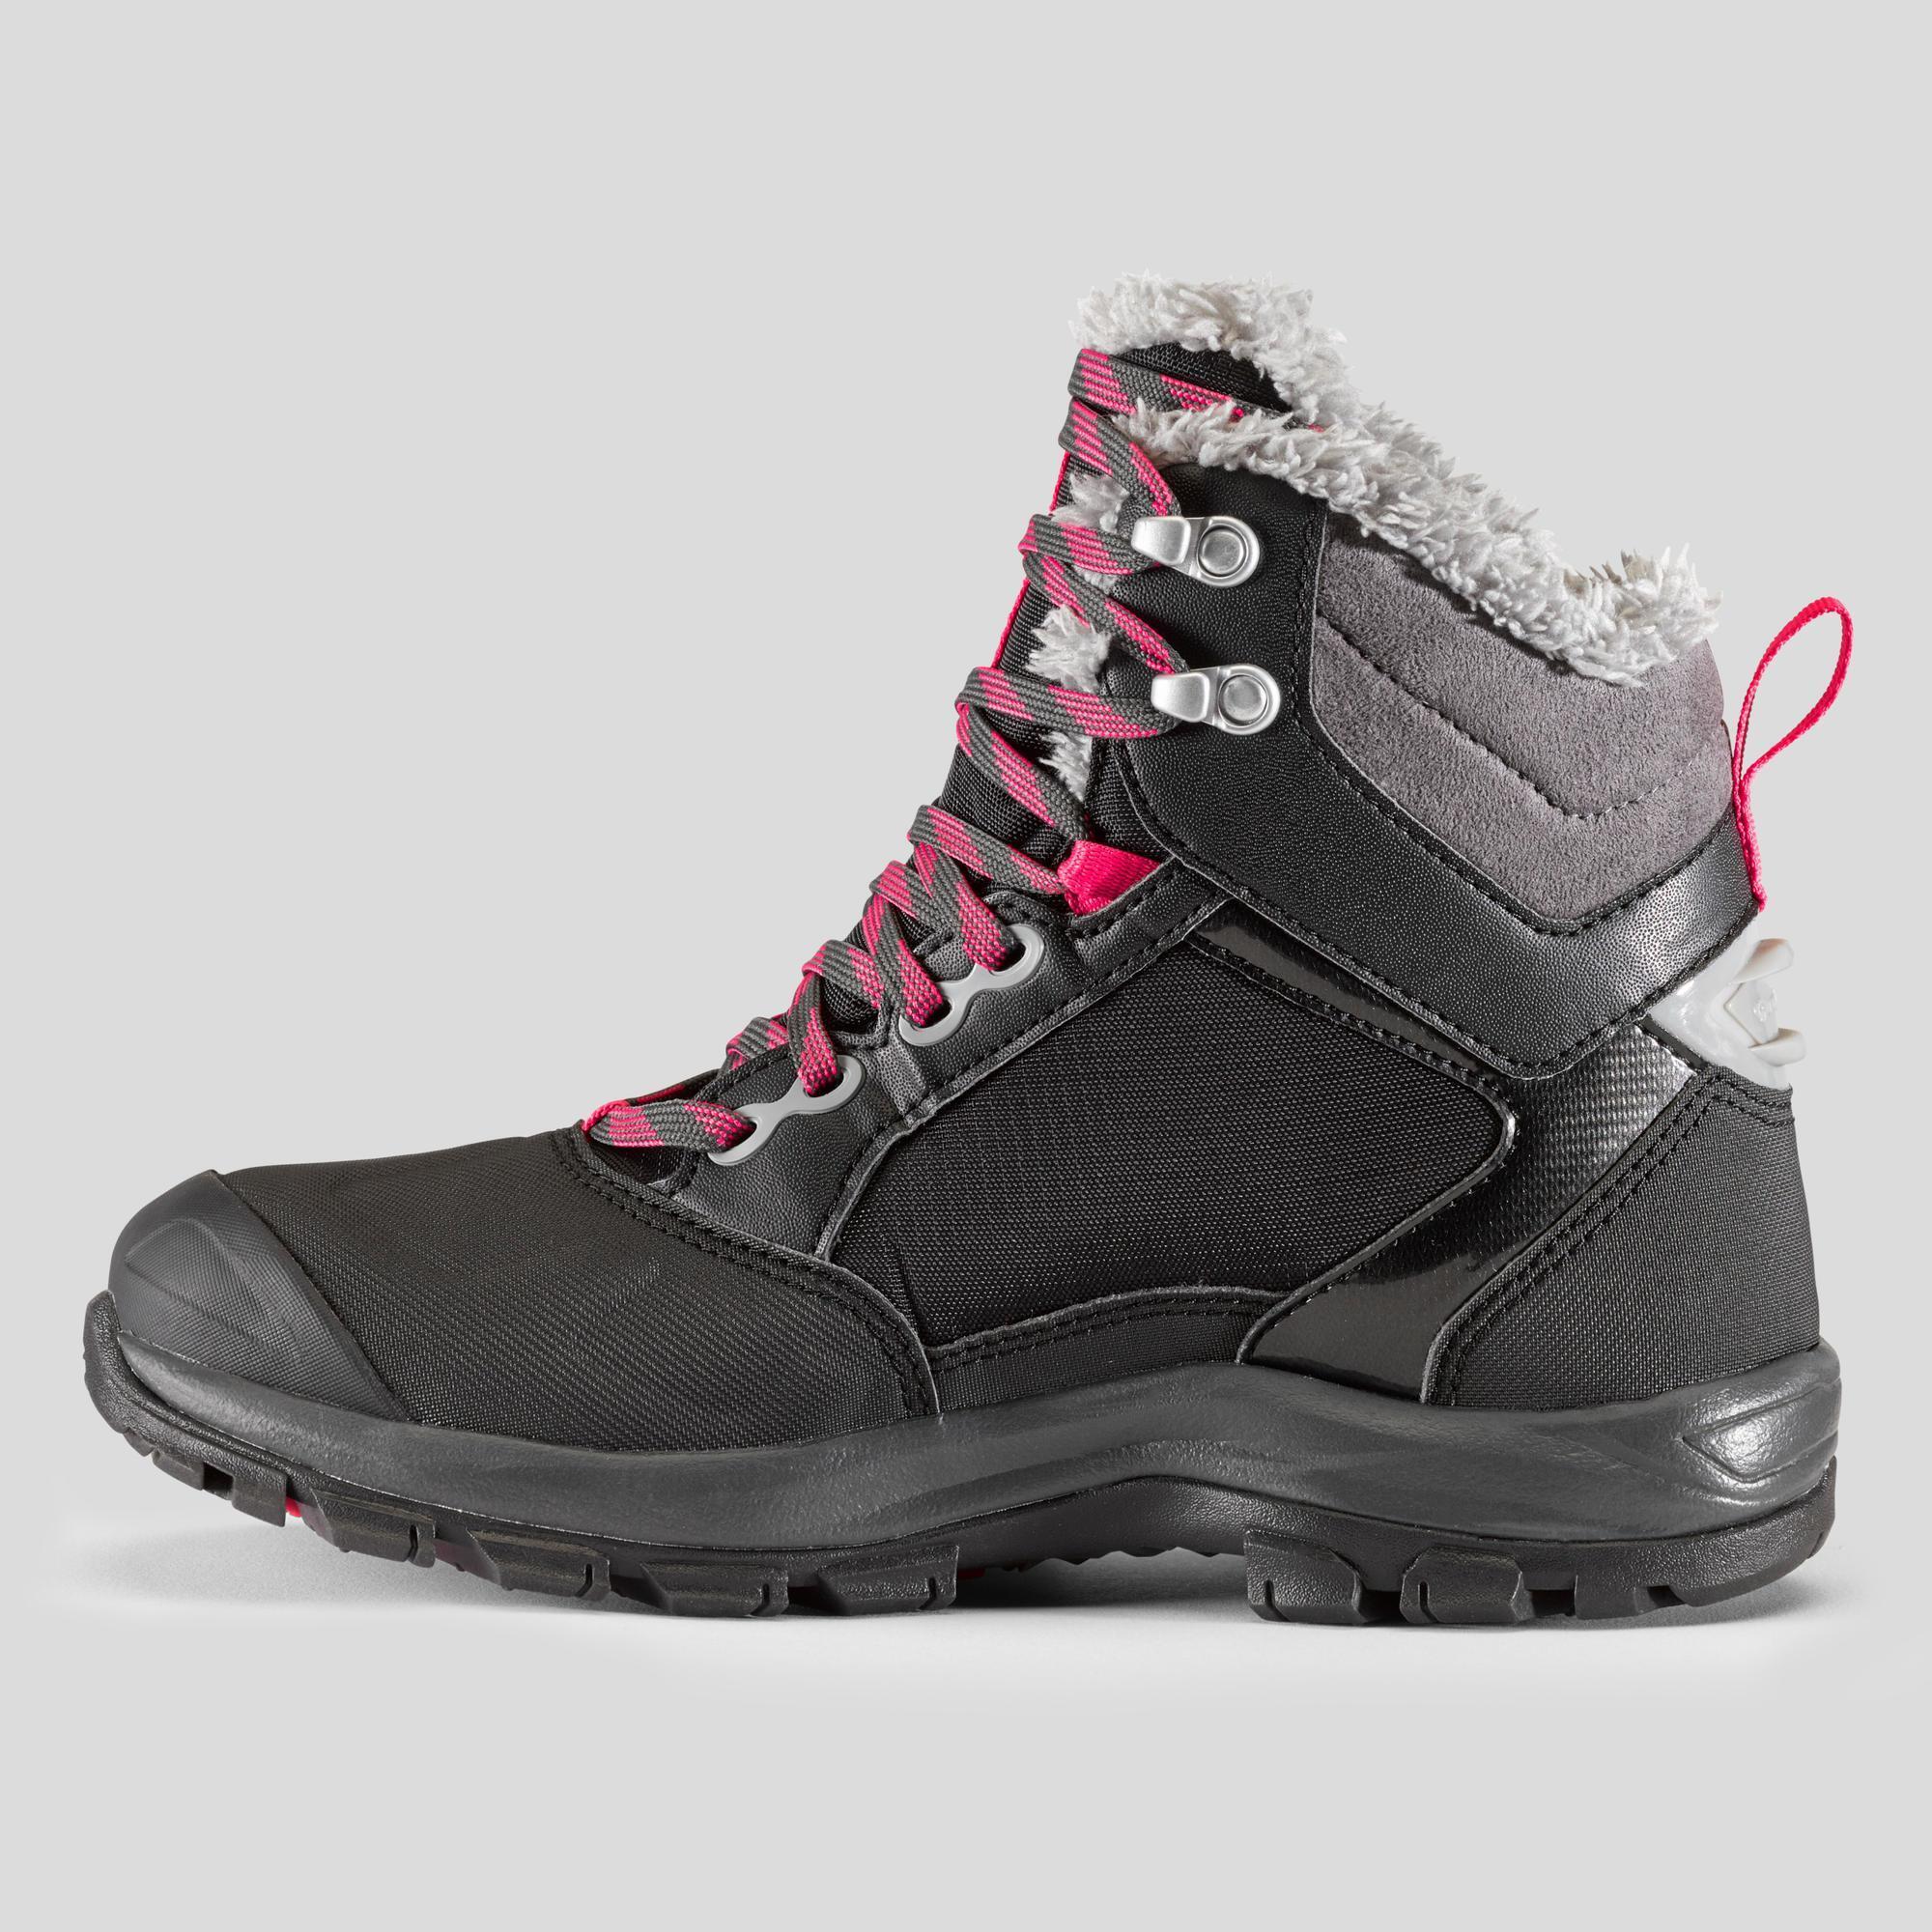 Women's Warm and Waterproof Hiking Boots - SH500 mountain MID 5/9